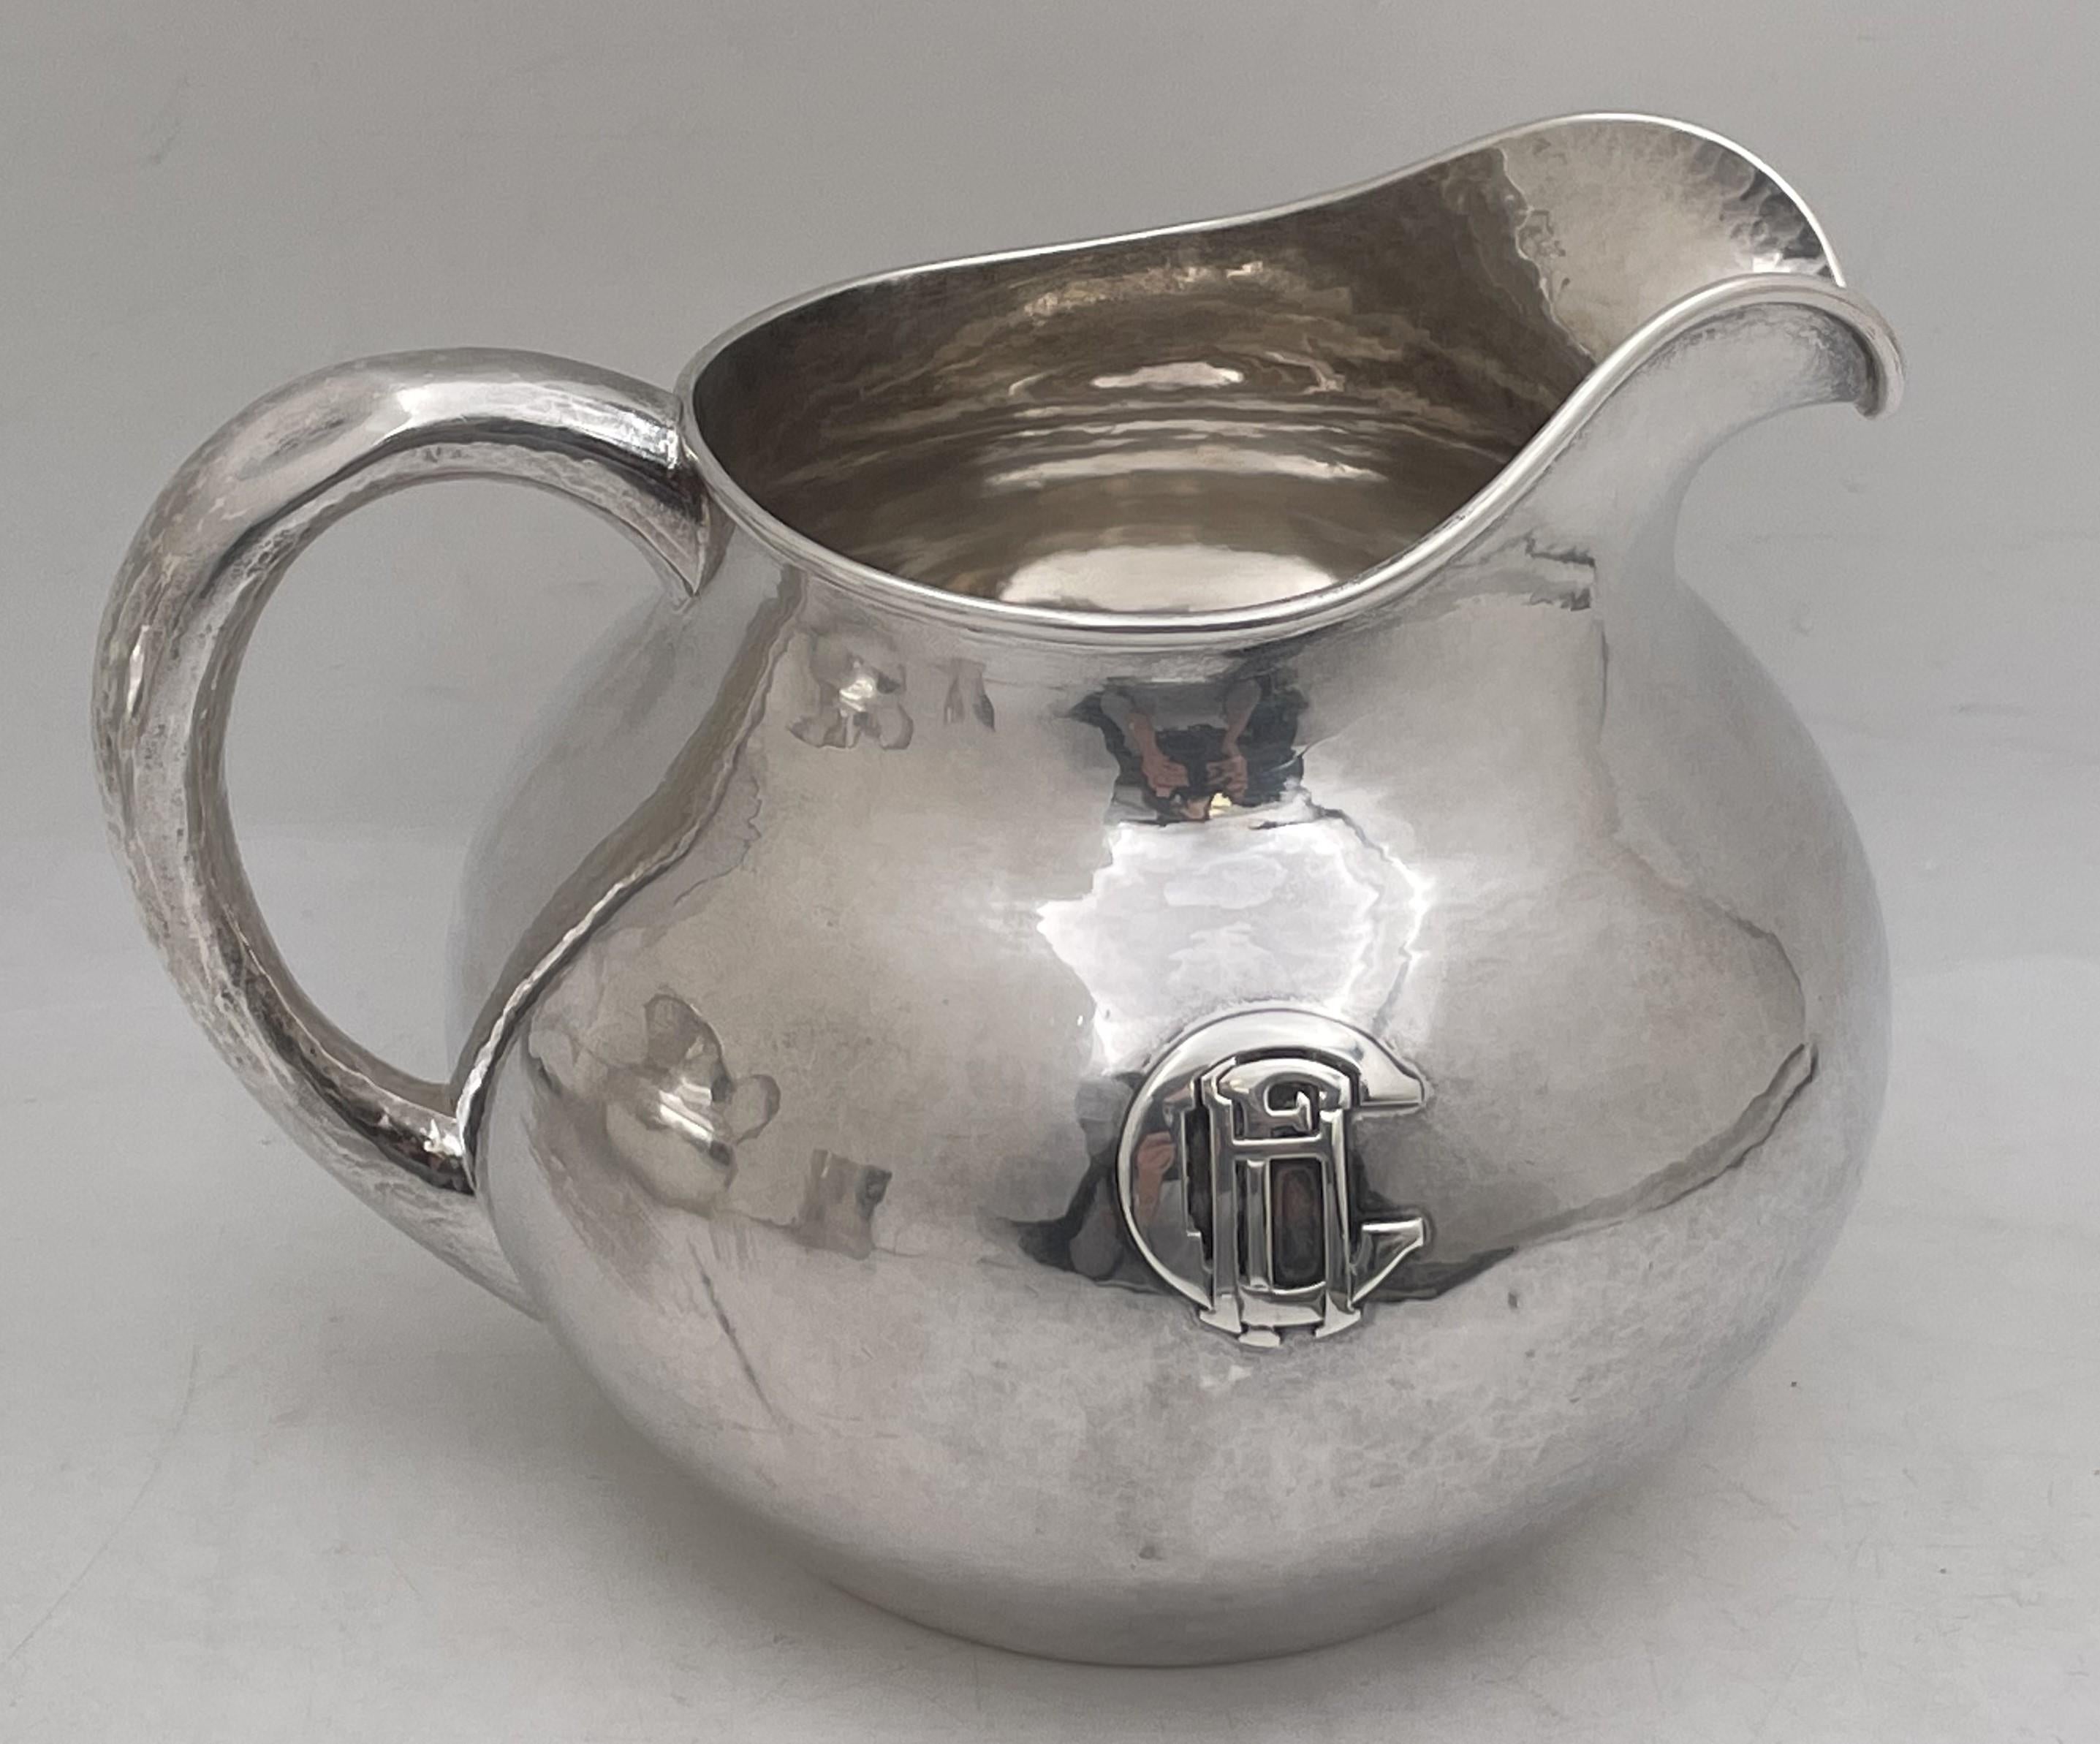 Arts and Crafts Kalo Sterling Silver Hand Wrought/ Hammered Pitcher Jug in Arts & Crafts 1910s